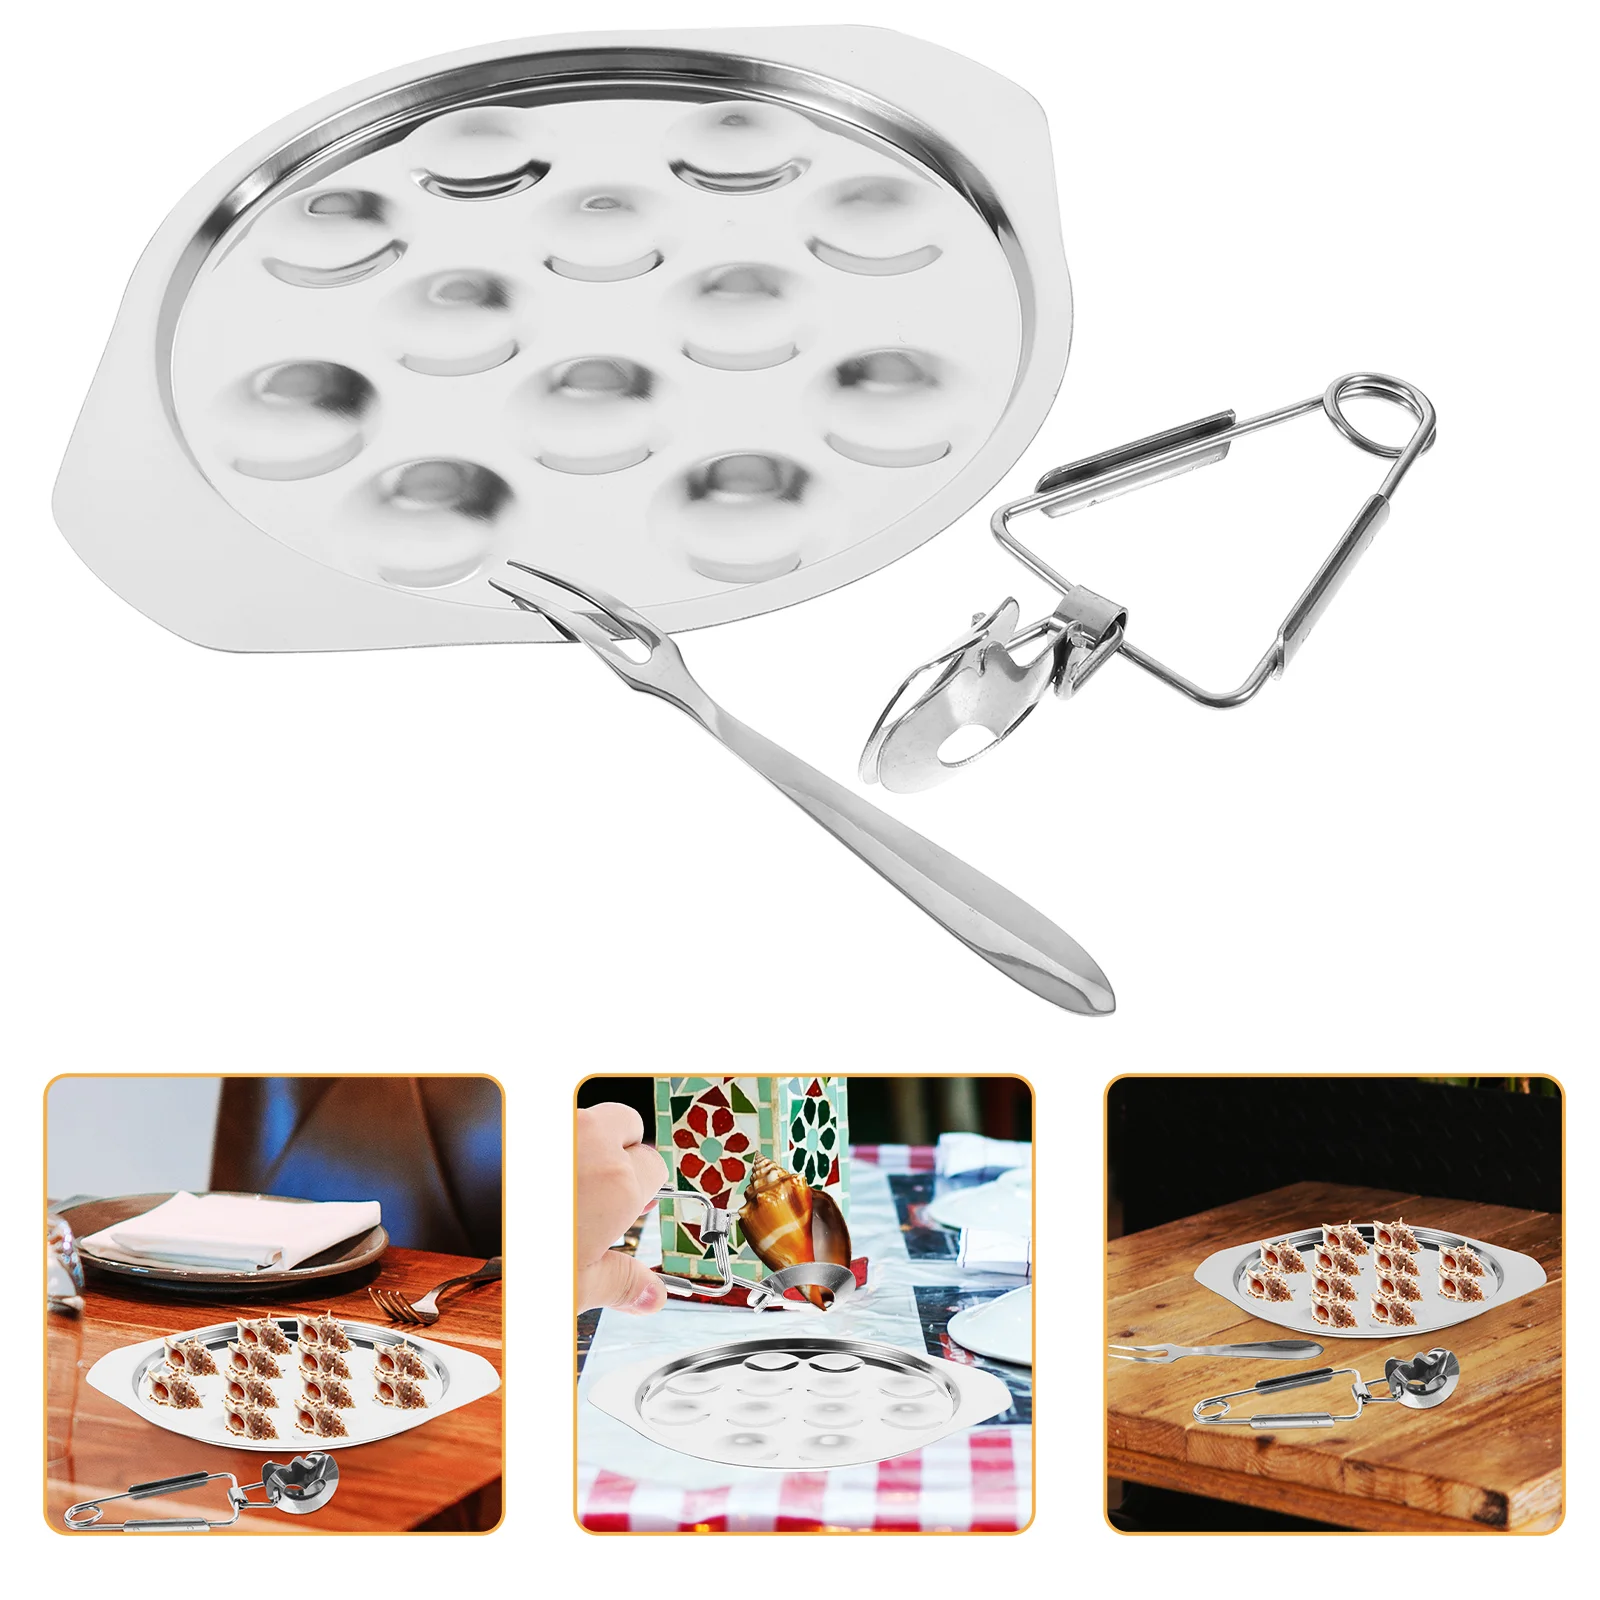 

Conch Cooking Tools Oyster Compartment Plate Escargot Metal 12 Holes Snail Barbecue Seafood Shell Baking Steel Mini Saucepan